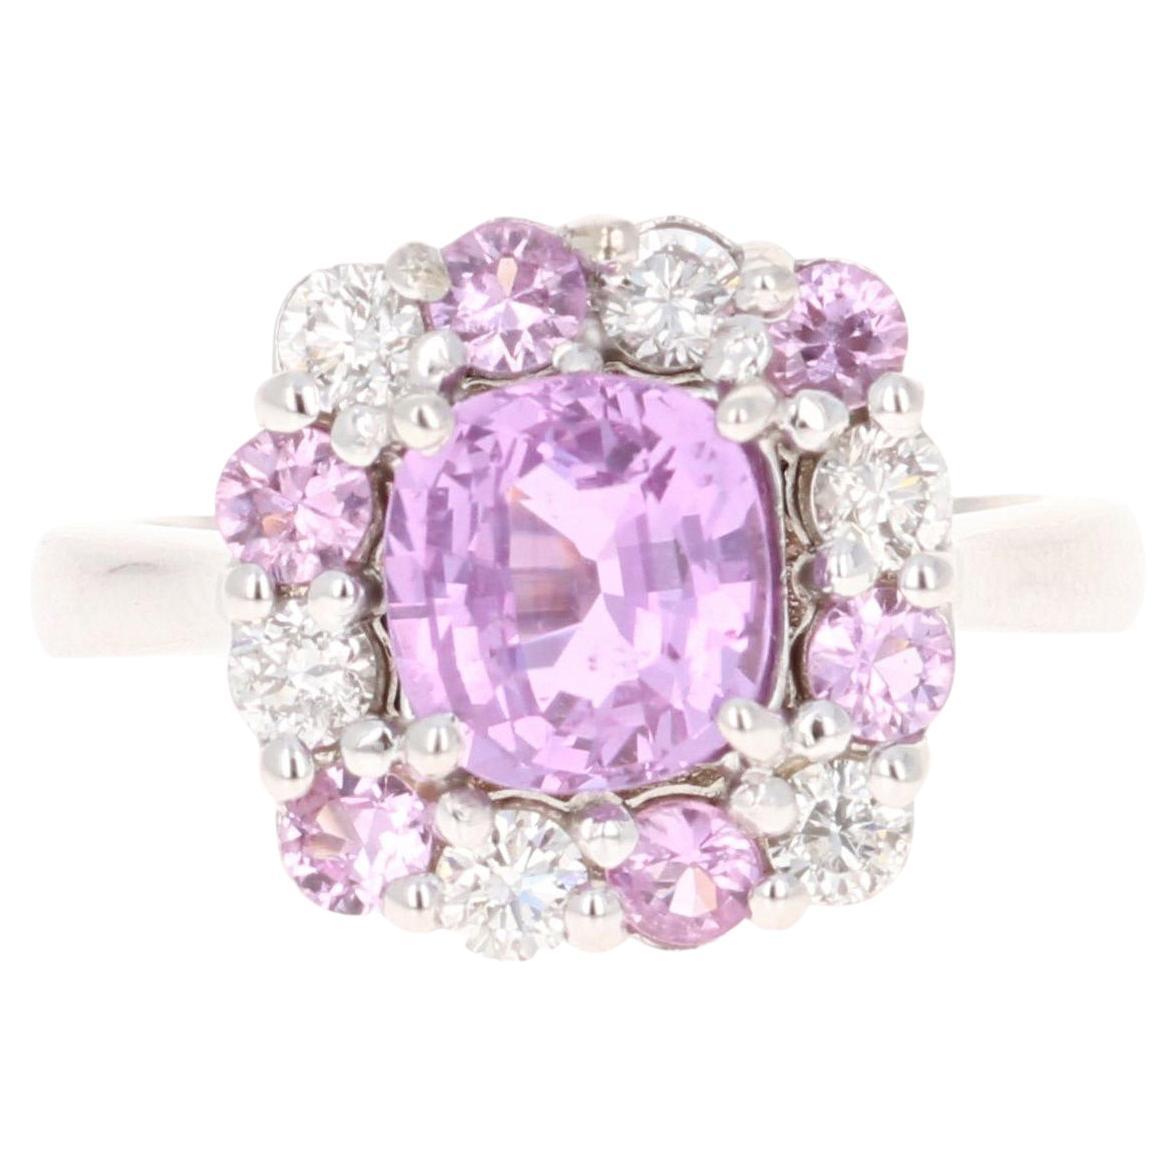 GIA Certified 3.09 Carat Pink Sapphire Diamond White Gold Engagement Ring For Sale